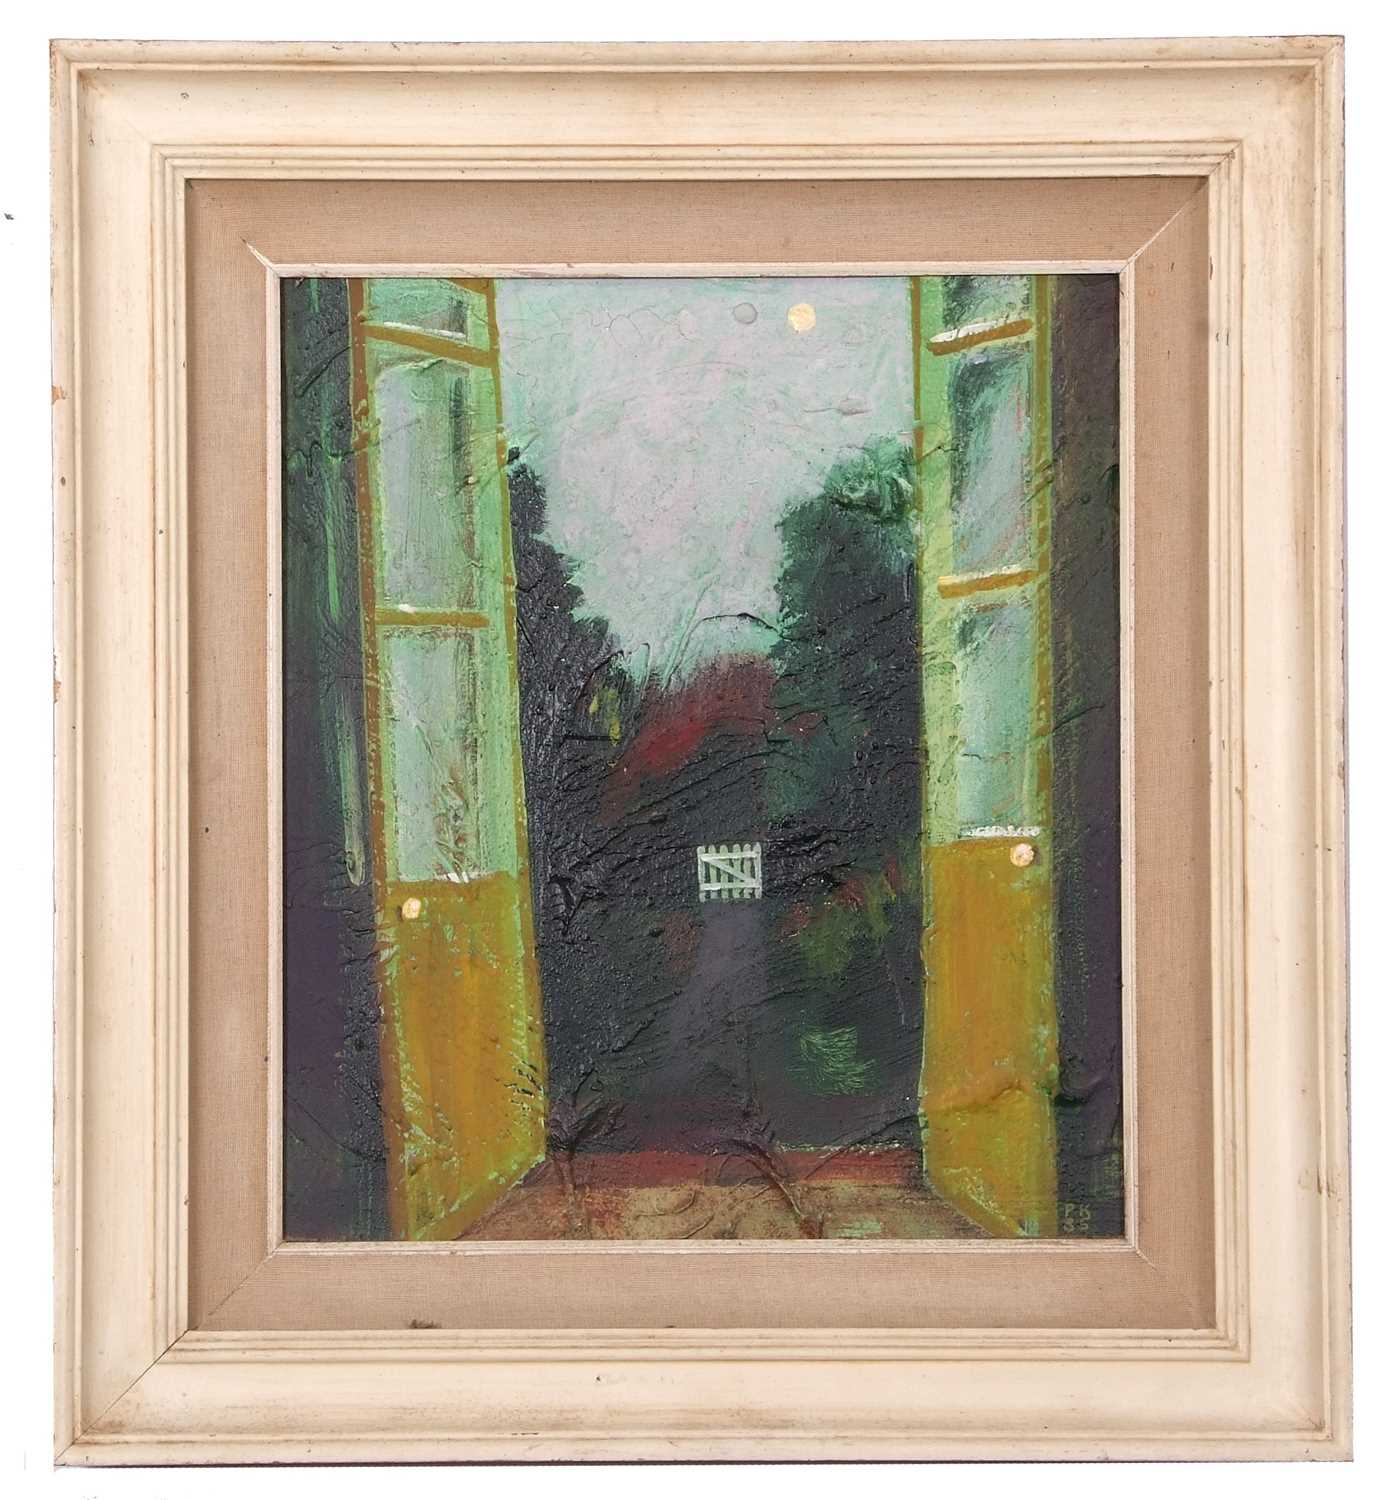 Paul Kitchin (1954-2002), 'Surburban Dreams', oil on board, signed and dated 85, 34x40cm, framed